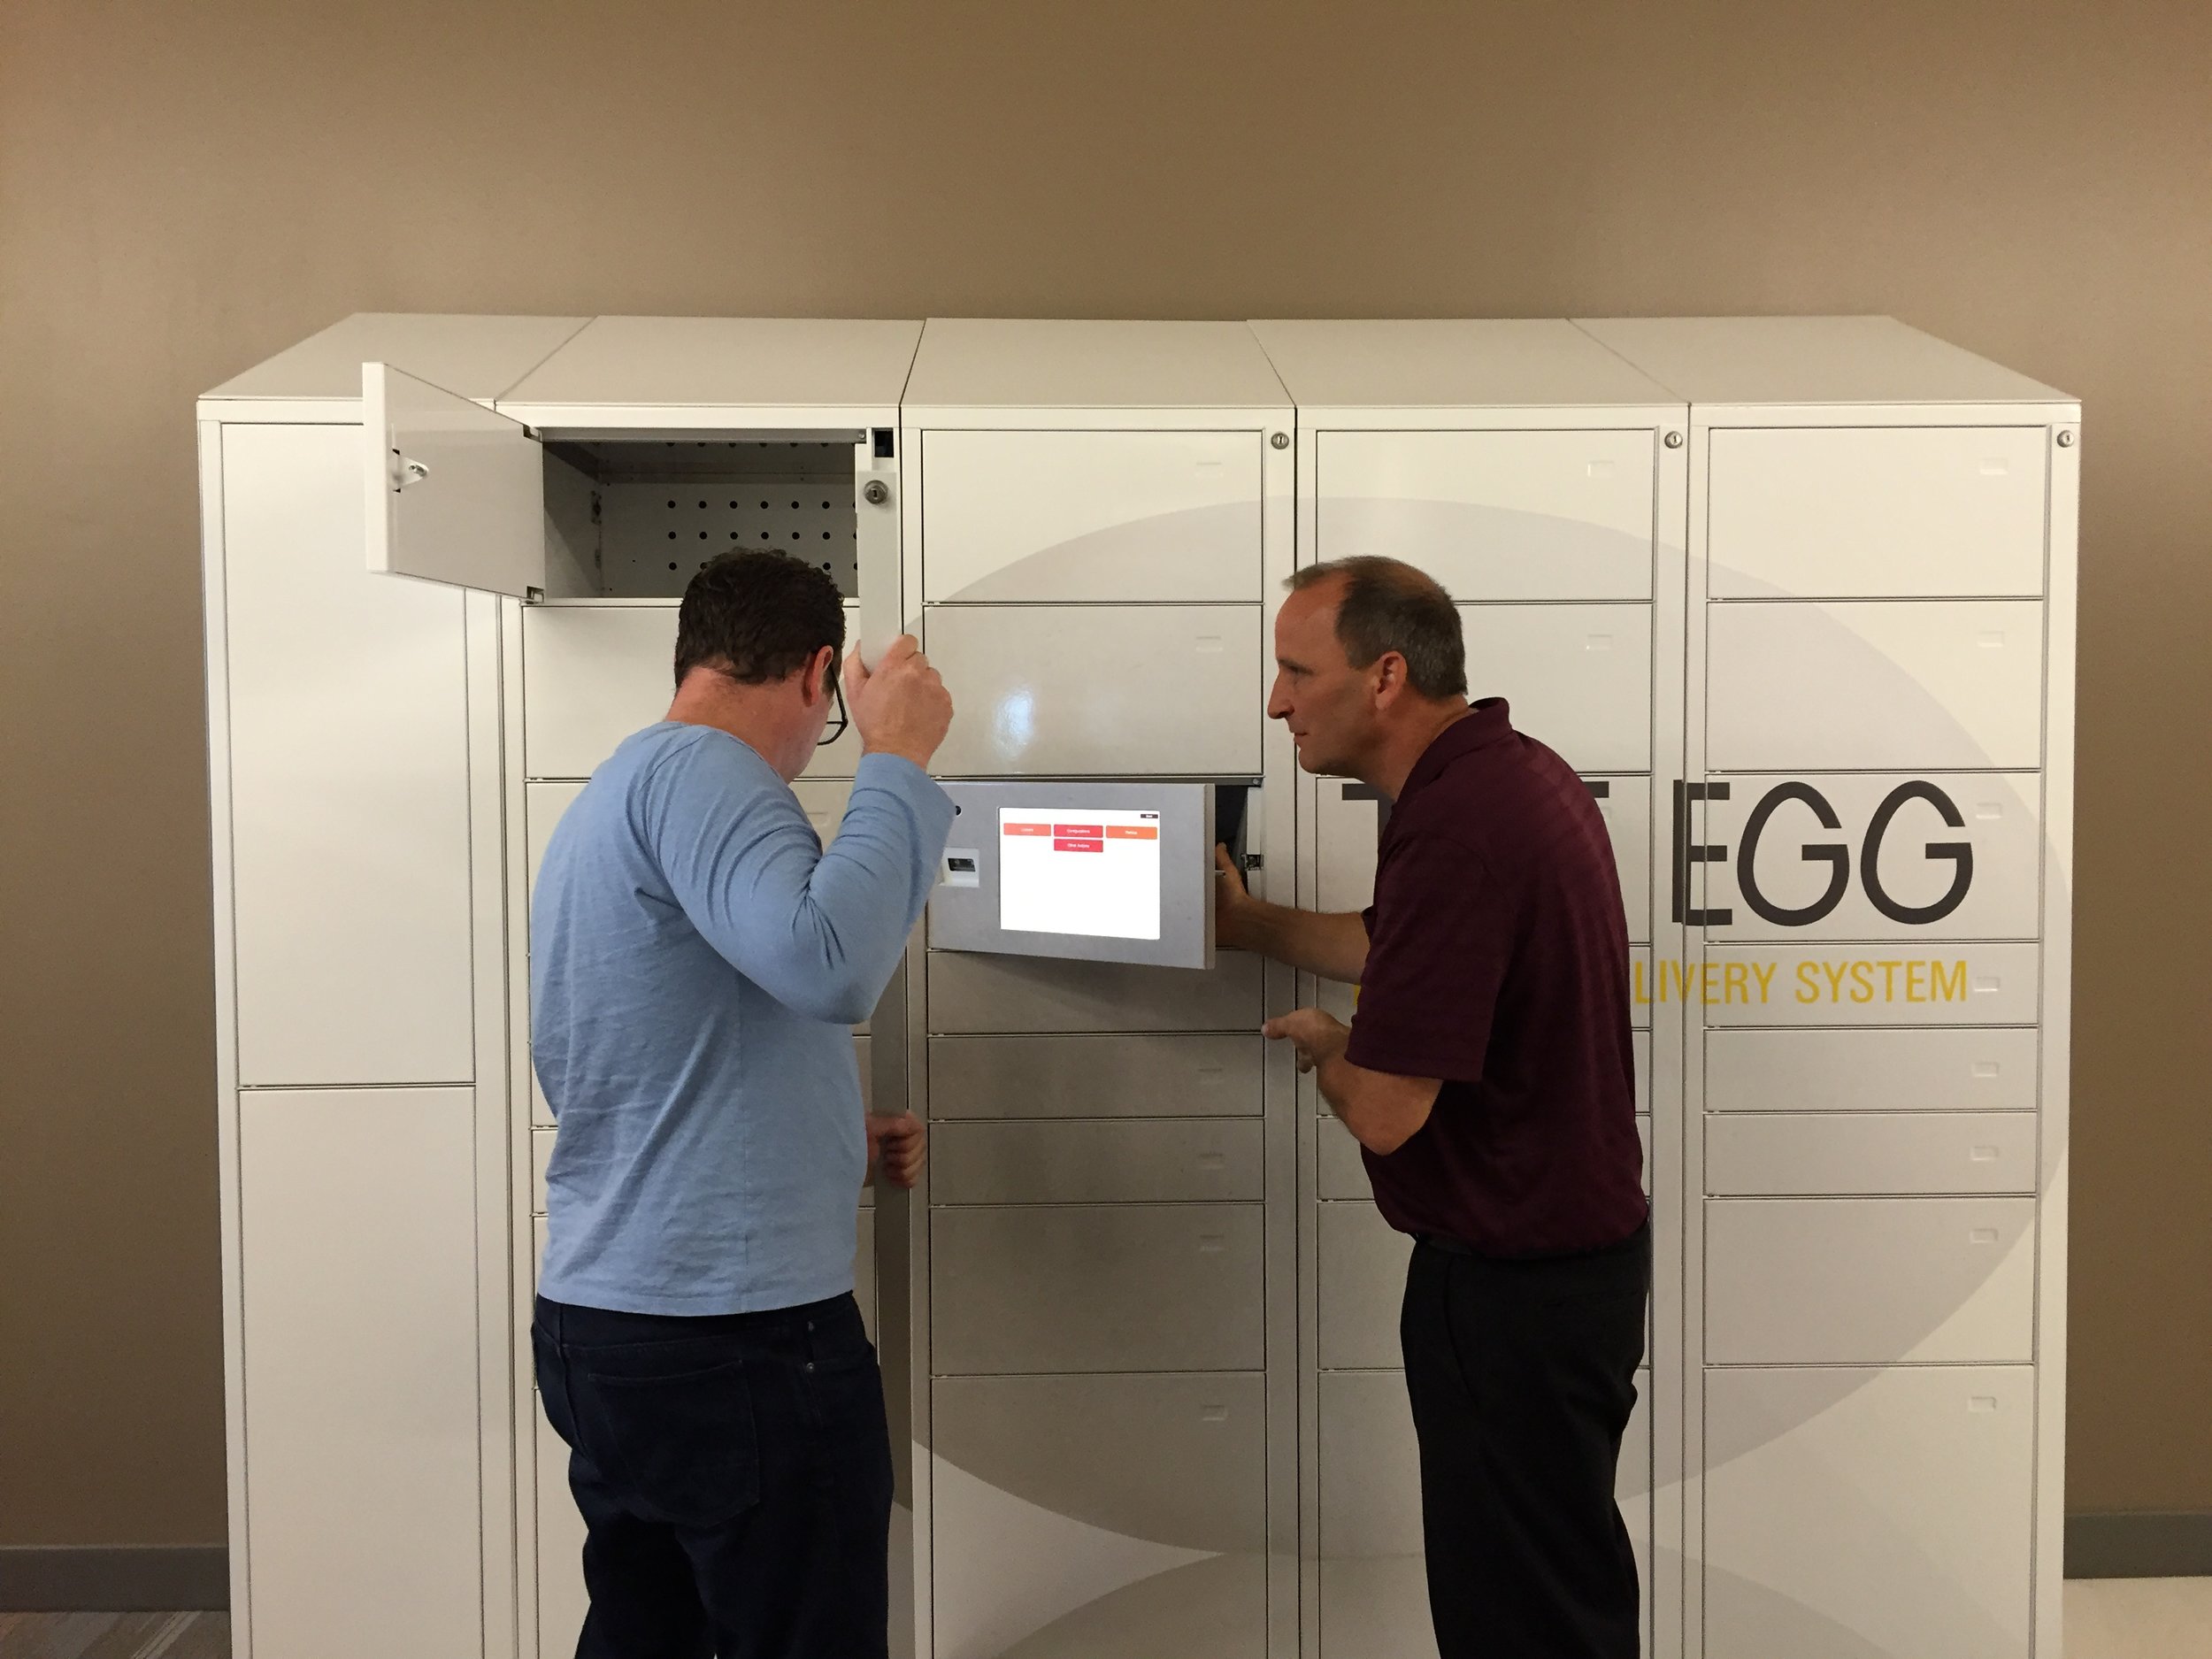 Two men examining the Egg lockers and old interface and tablet